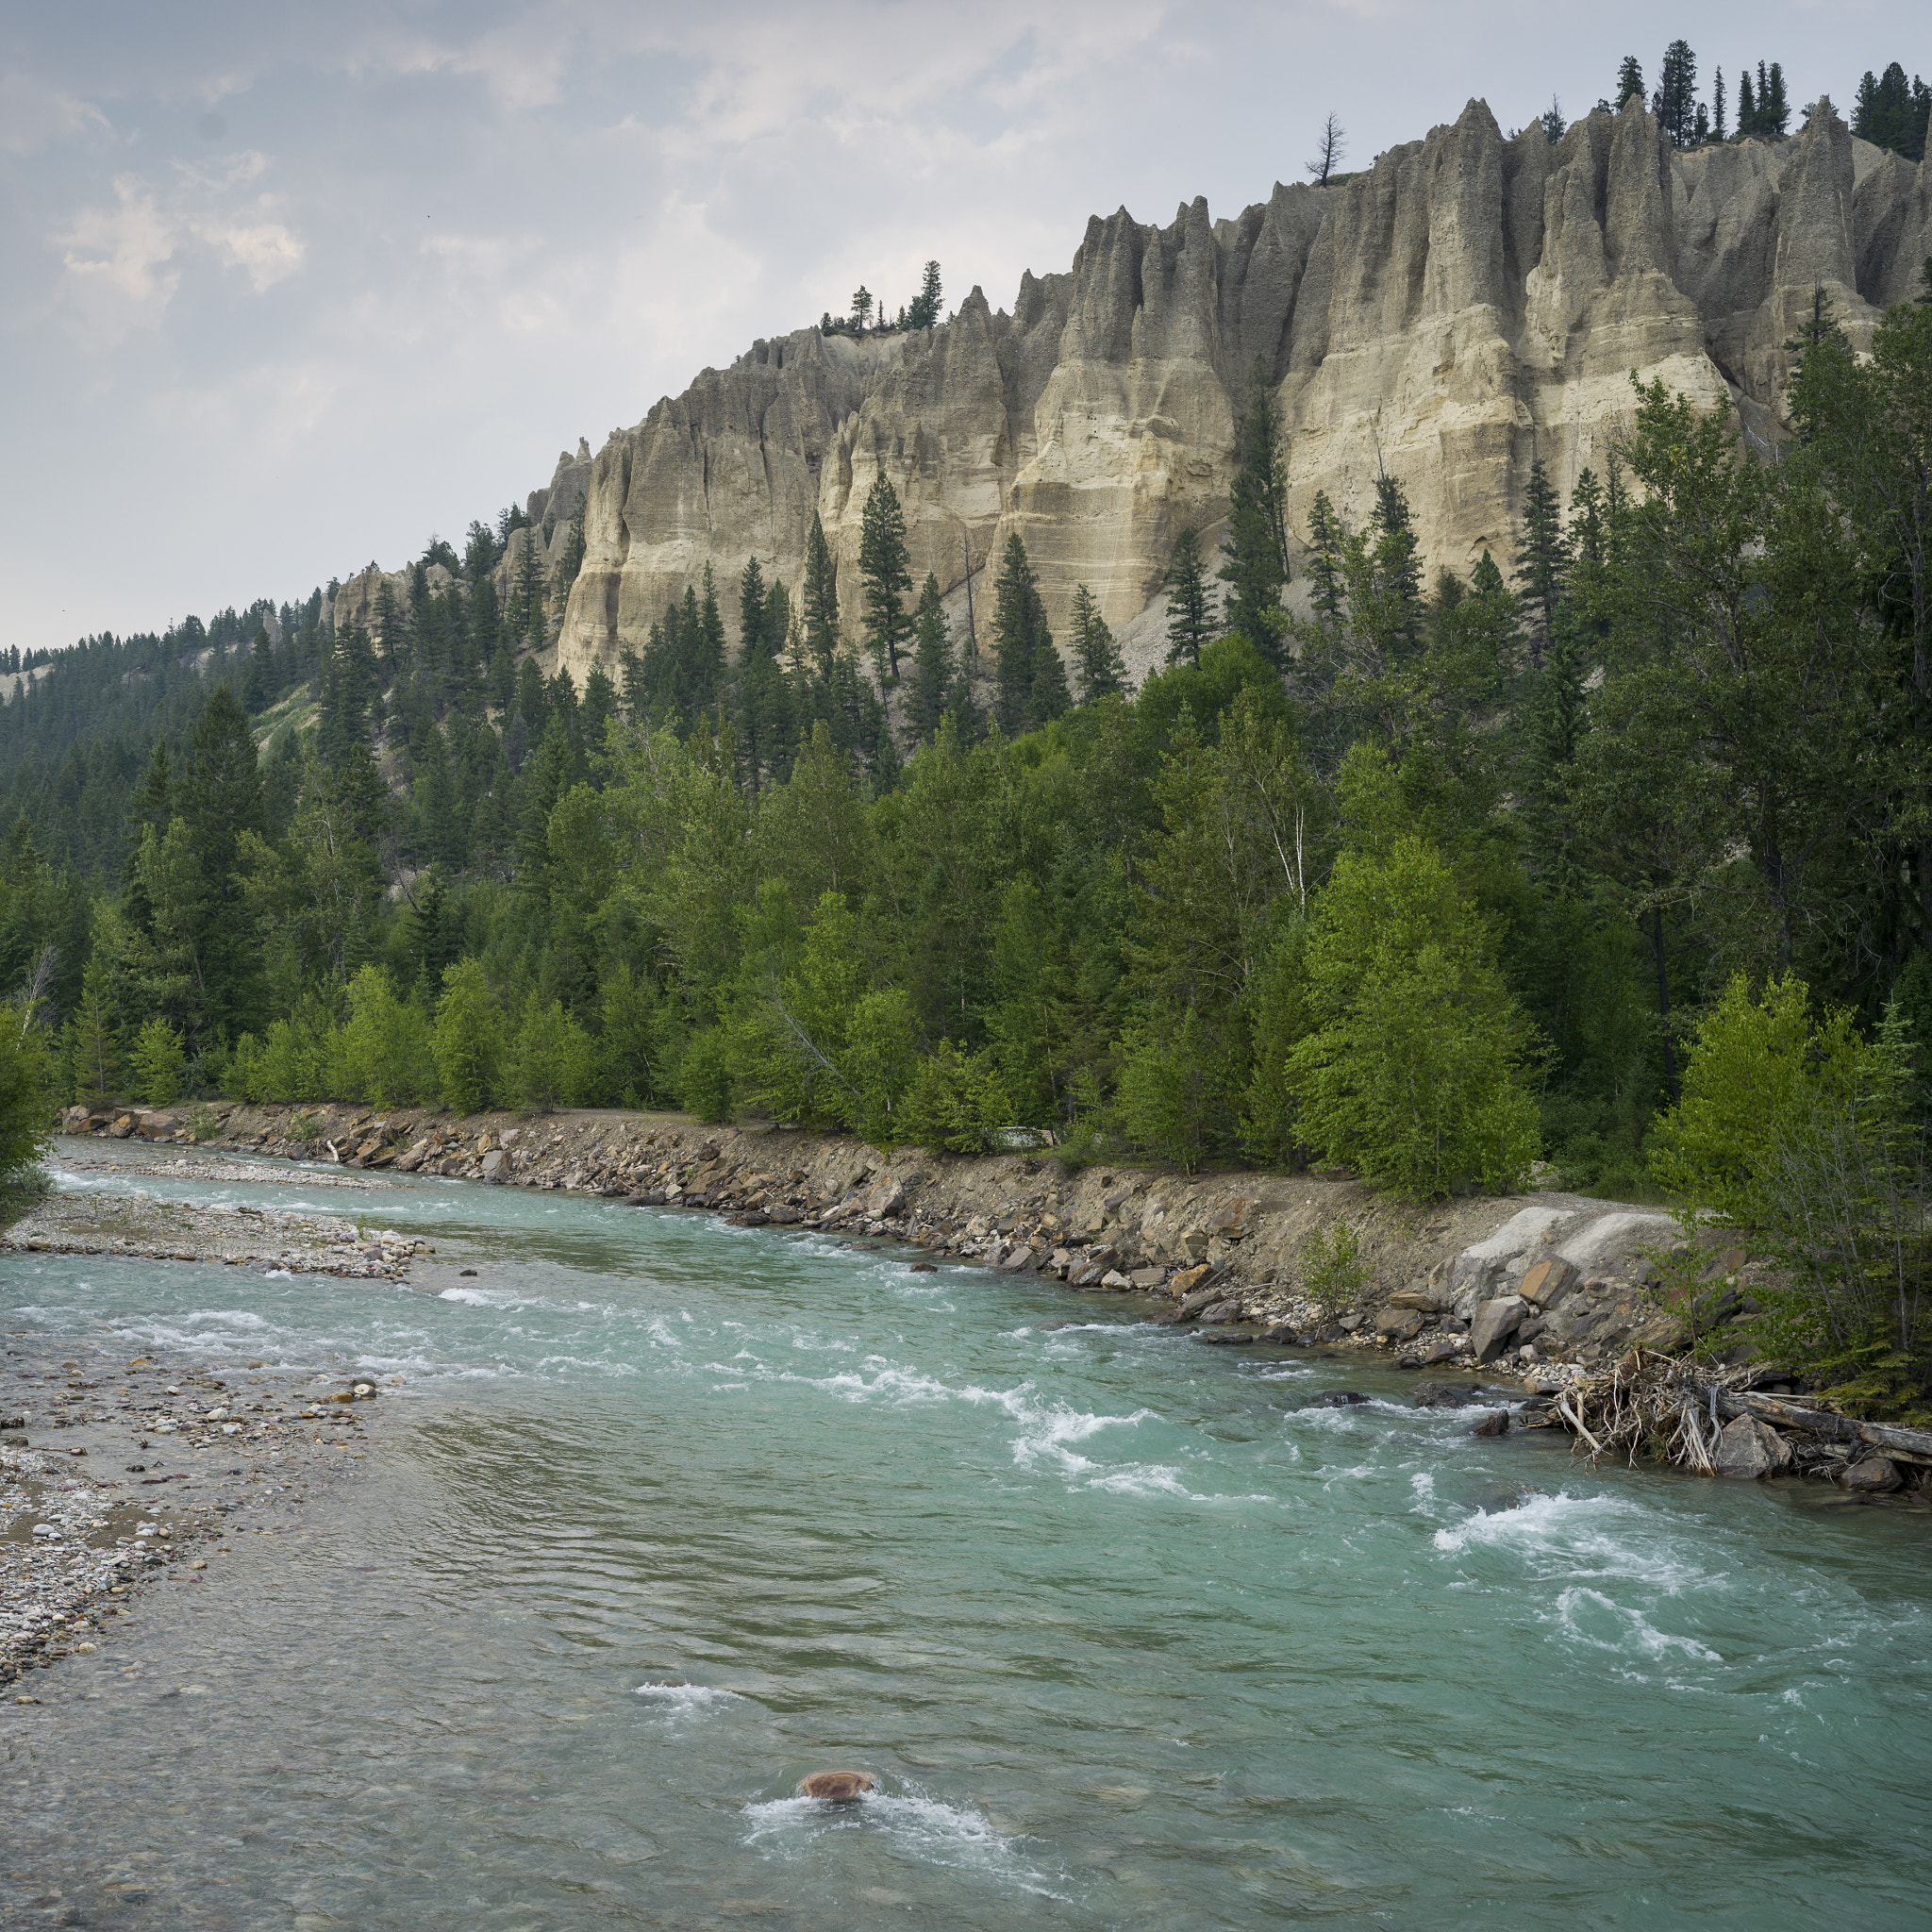 Hasselblad X1D-50c sample photo. River flowing through forest, kootenay river, east kootenay g, b photography